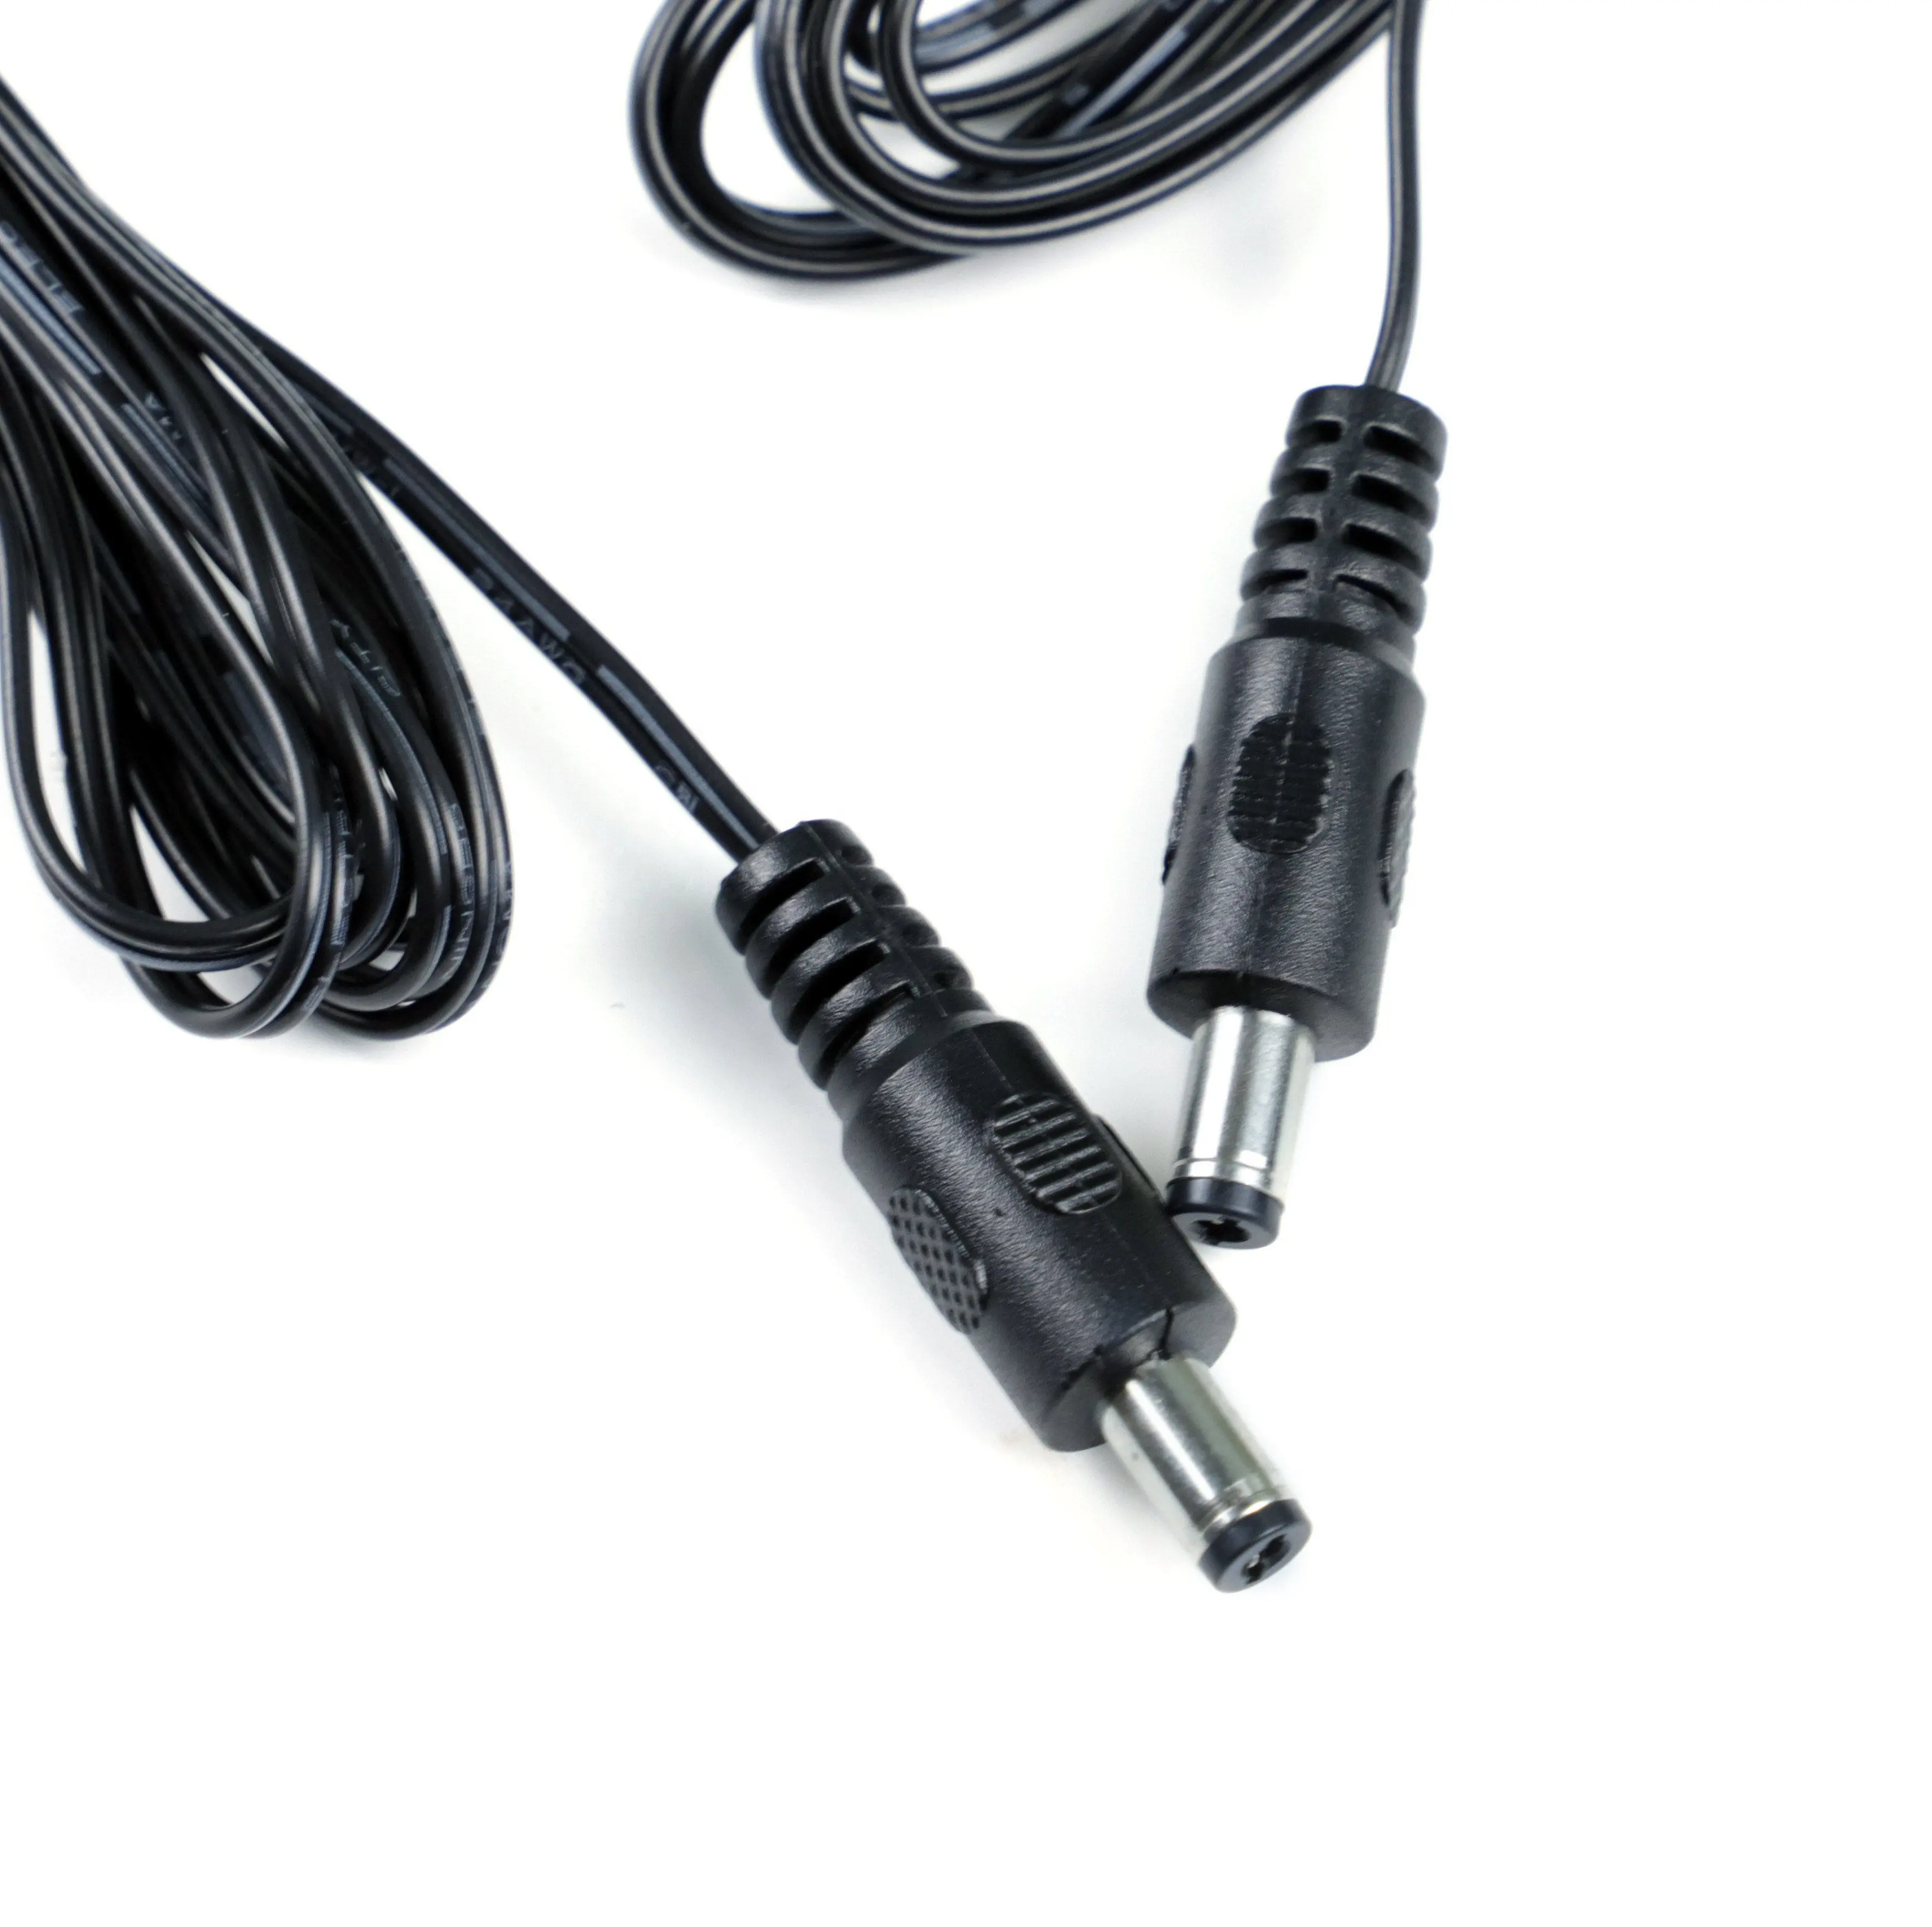 1m 5m 10m 12V Male To Male Female DC 5.5x2.1mm 5.5x2.5mm 4.0x1.7mm 3.5x1.35mm Barrel Jack Power Extension Cable